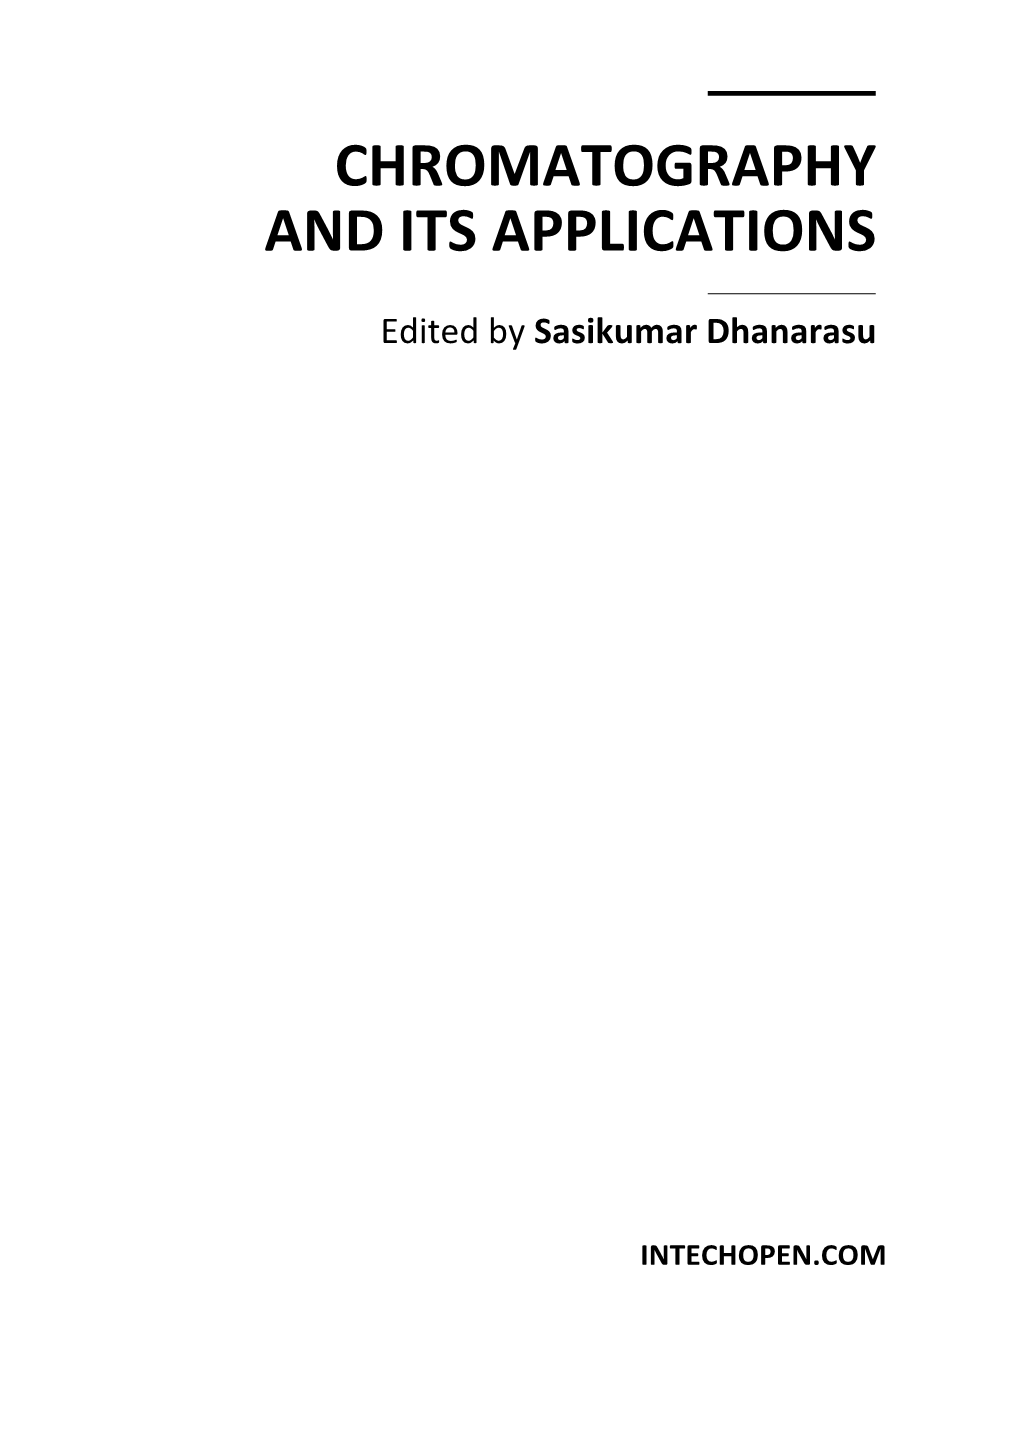 Chromatography and Its Applications